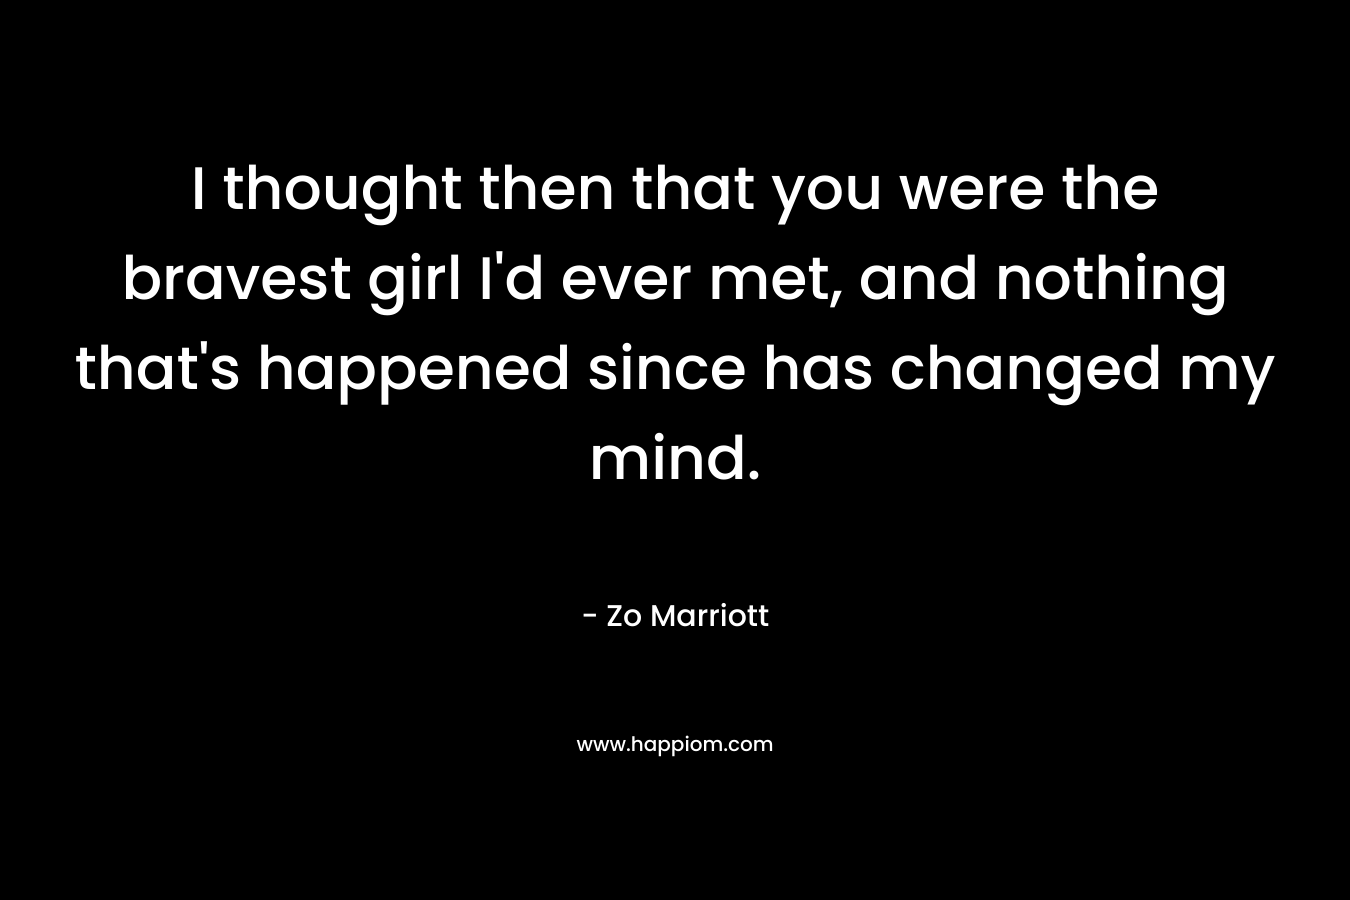 I thought then that you were the bravest girl I’d ever met, and nothing that’s happened since has changed my mind. – Zo Marriott